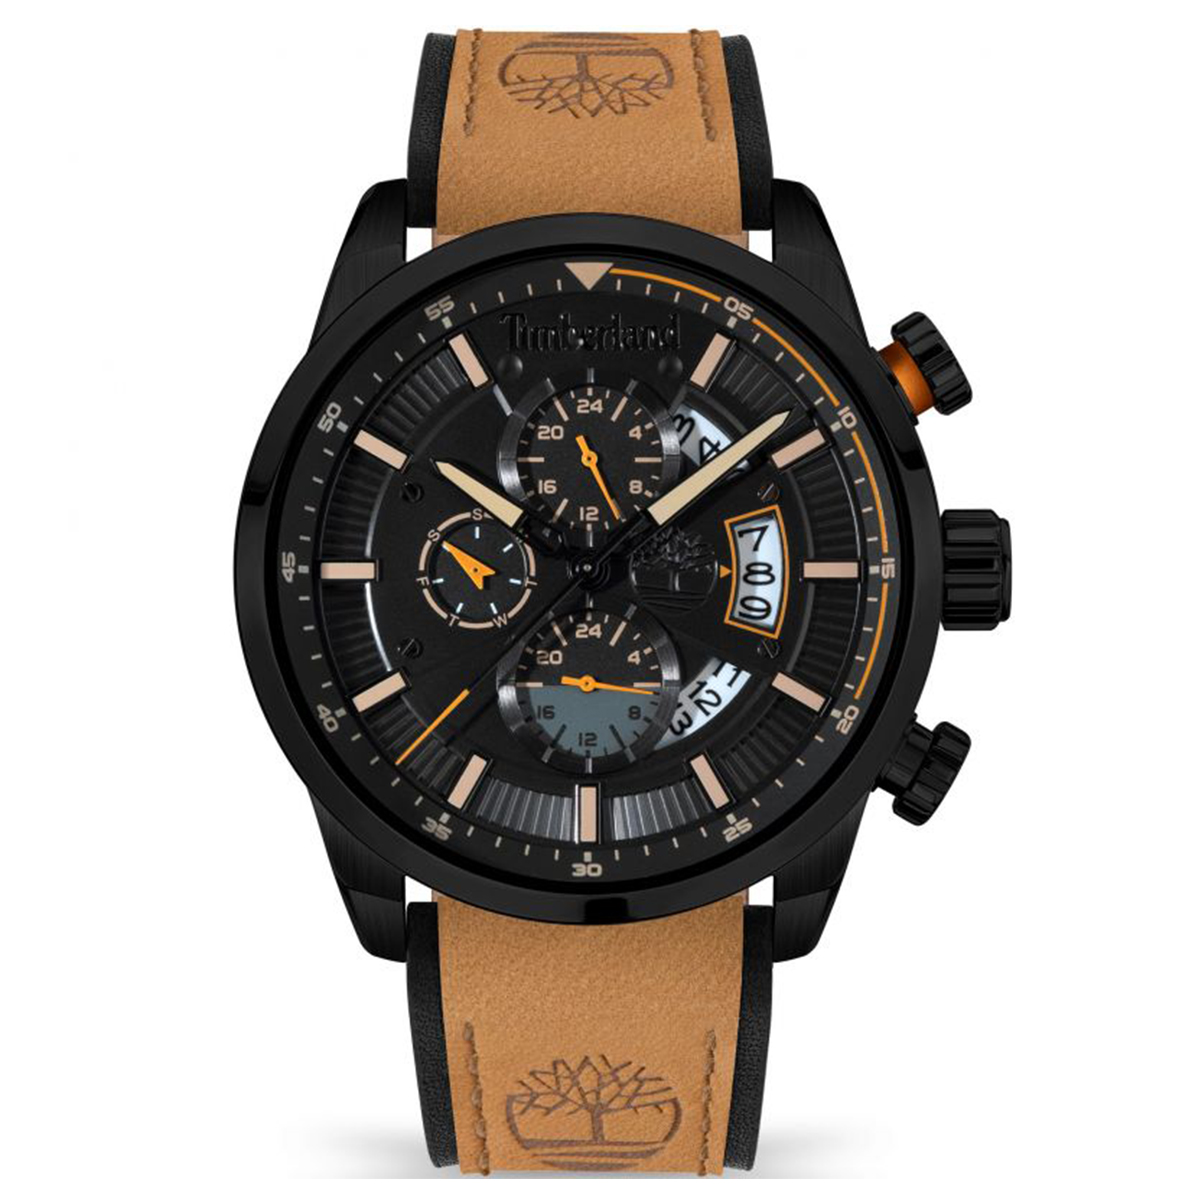 MONTRE TIMBERLAND HOMME CHRONO CUIR